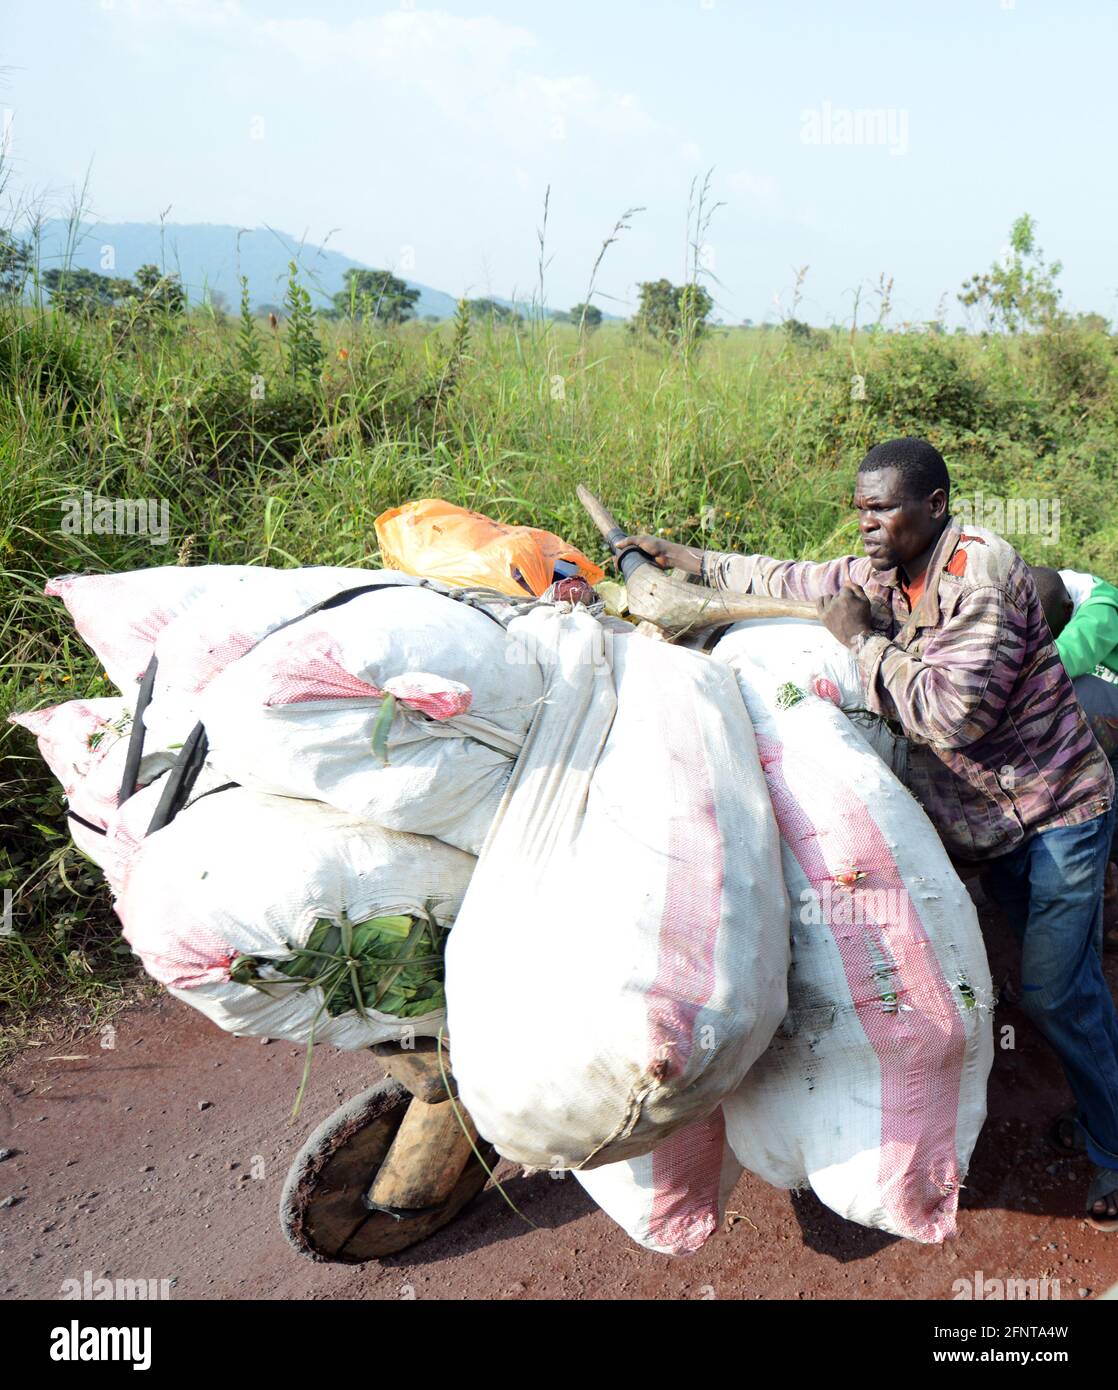 A Congolese man carrying bags of fresh produce on his Chukudu scooter. Stock Photo